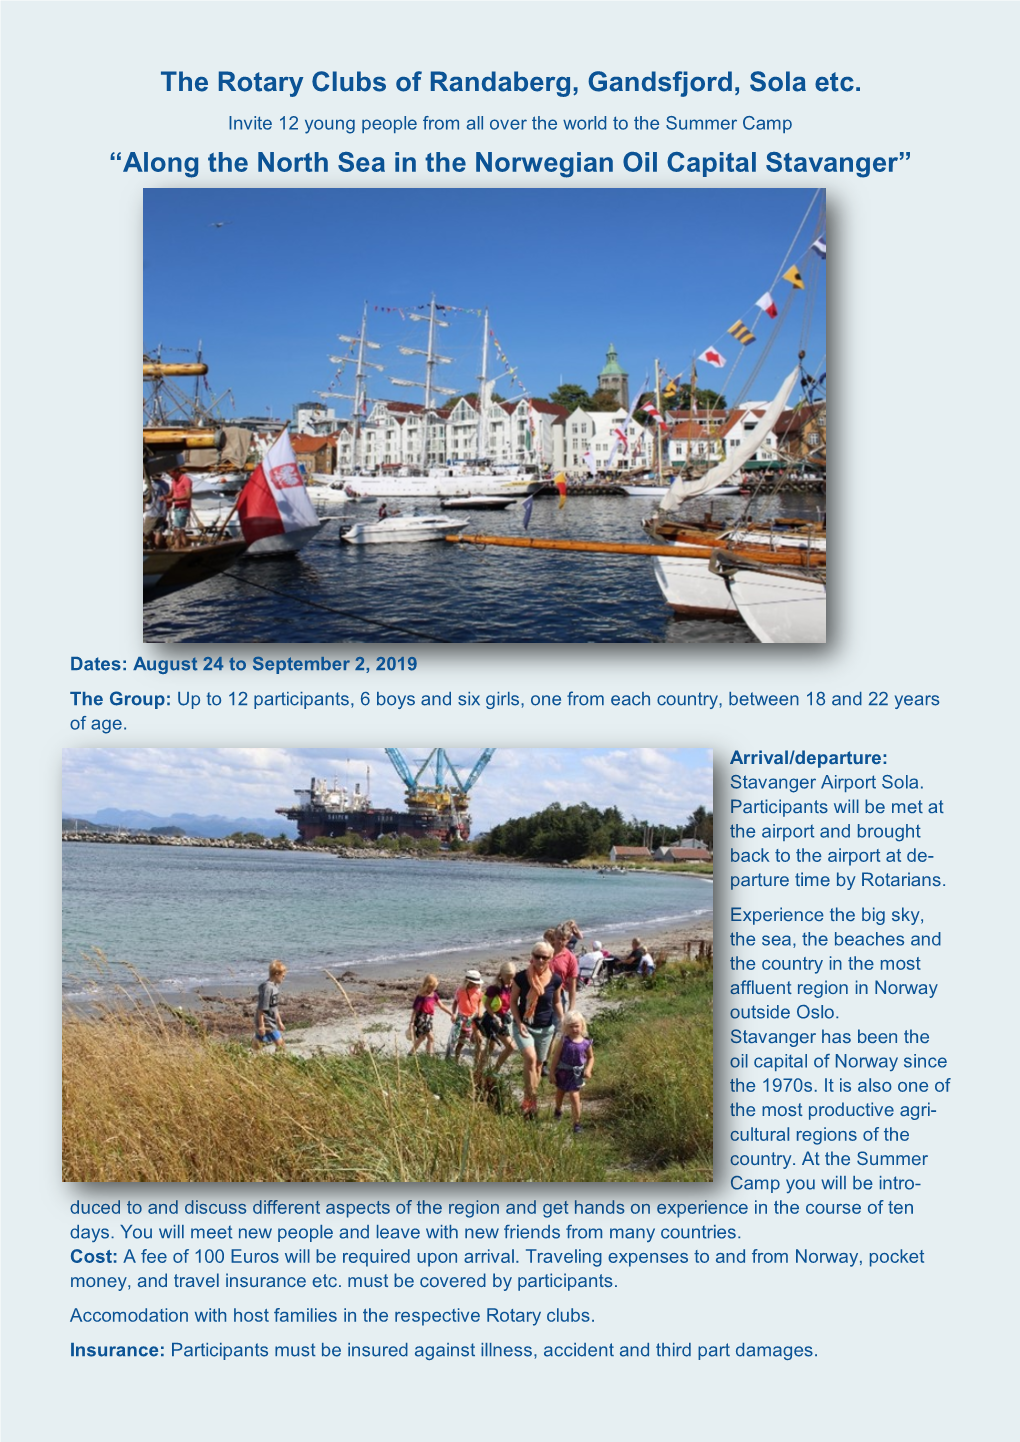 The Rotary Clubs of Randaberg, Gandsfjord, Sola Etc. “Along The